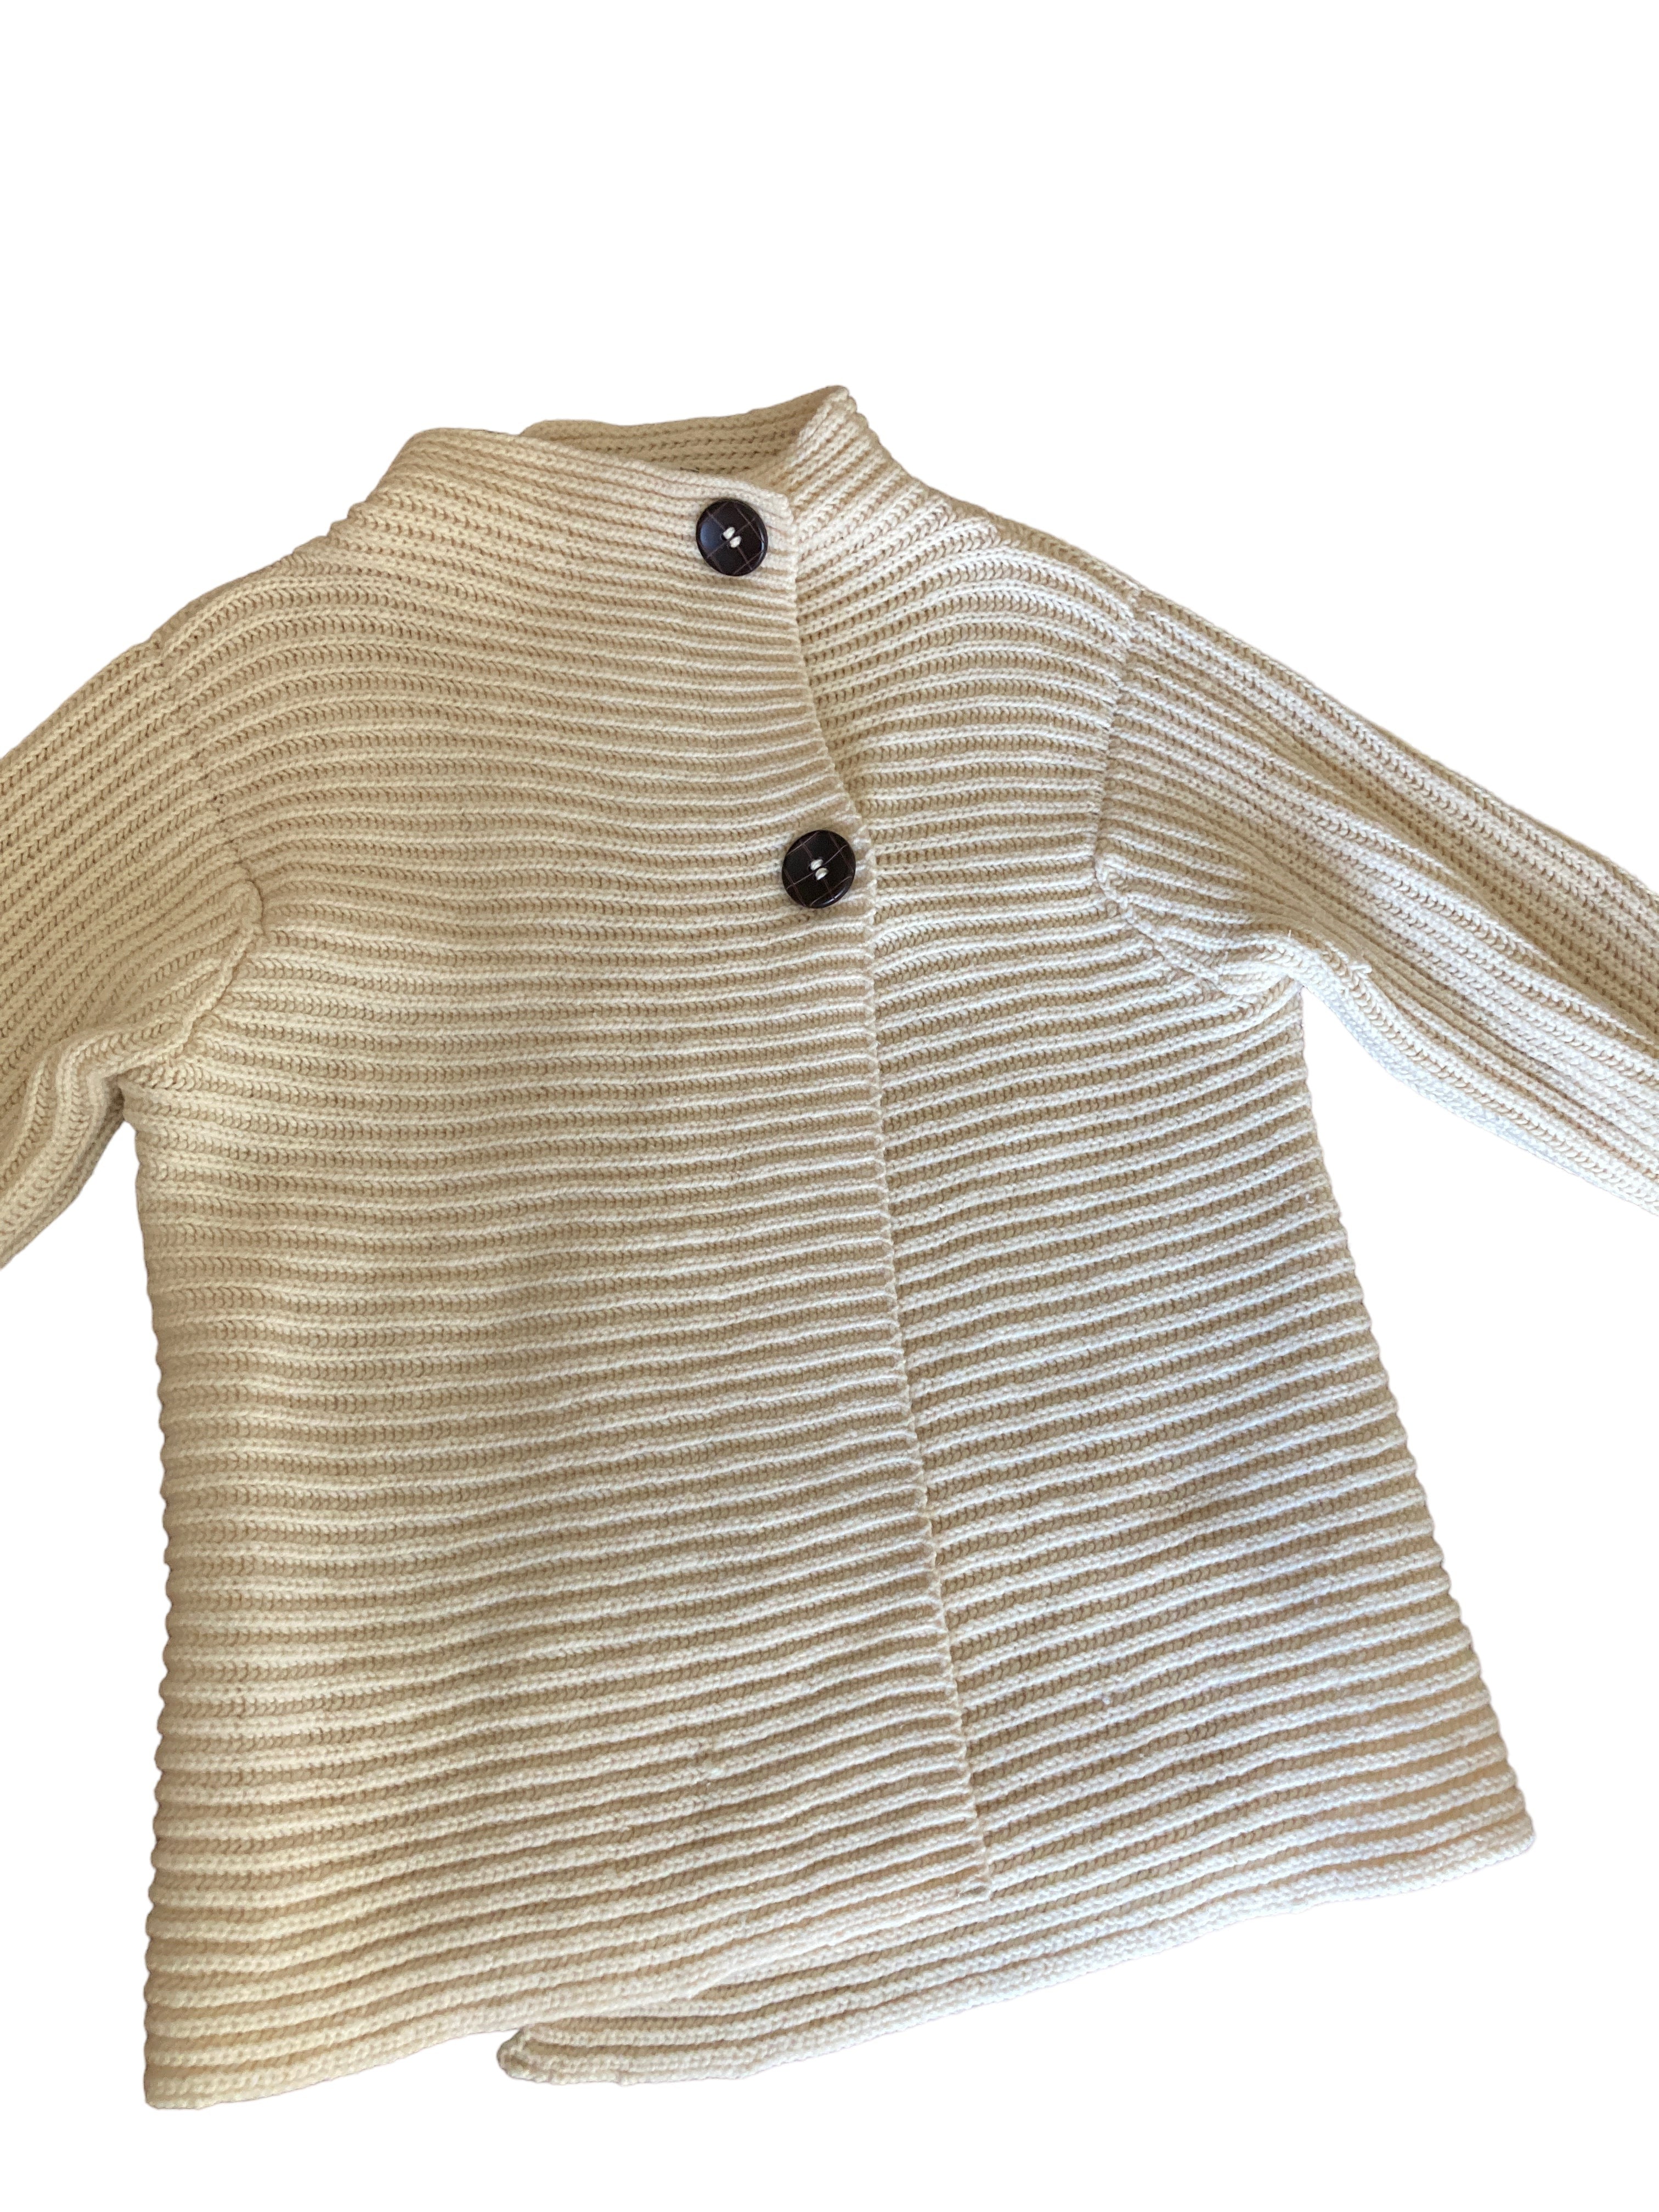 Fisherman Out of Ireland Ivory Wool Blend Chunky Sweater, L